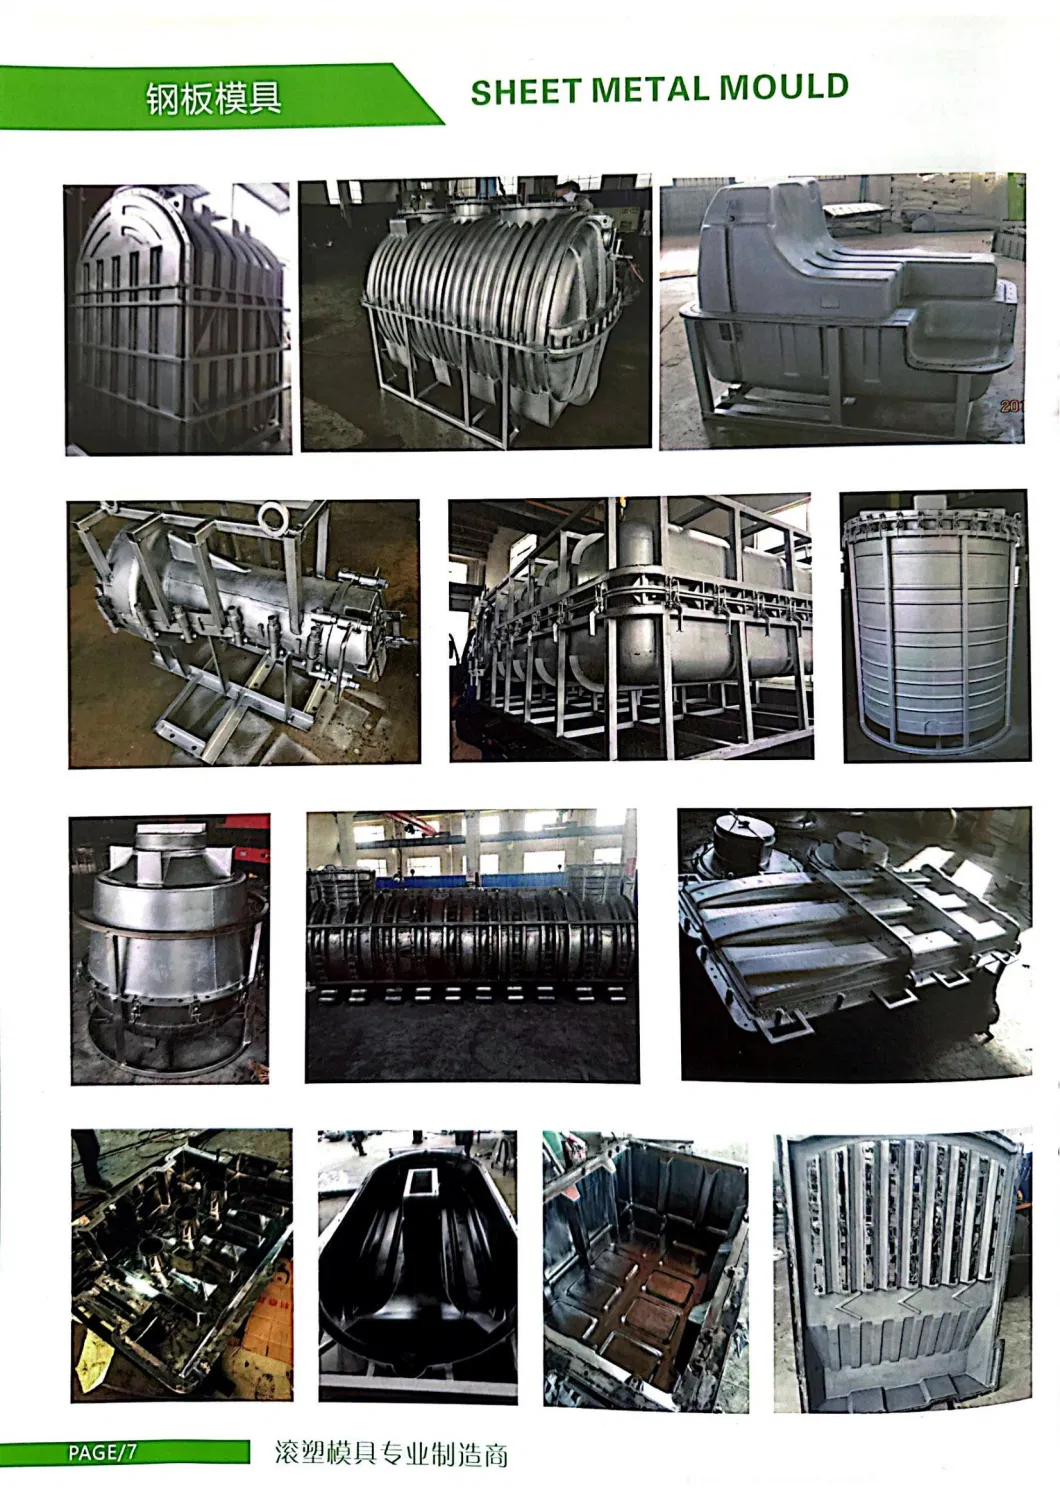 Yi Song Underground Tank Mold Septic Tank Mold Die Casting